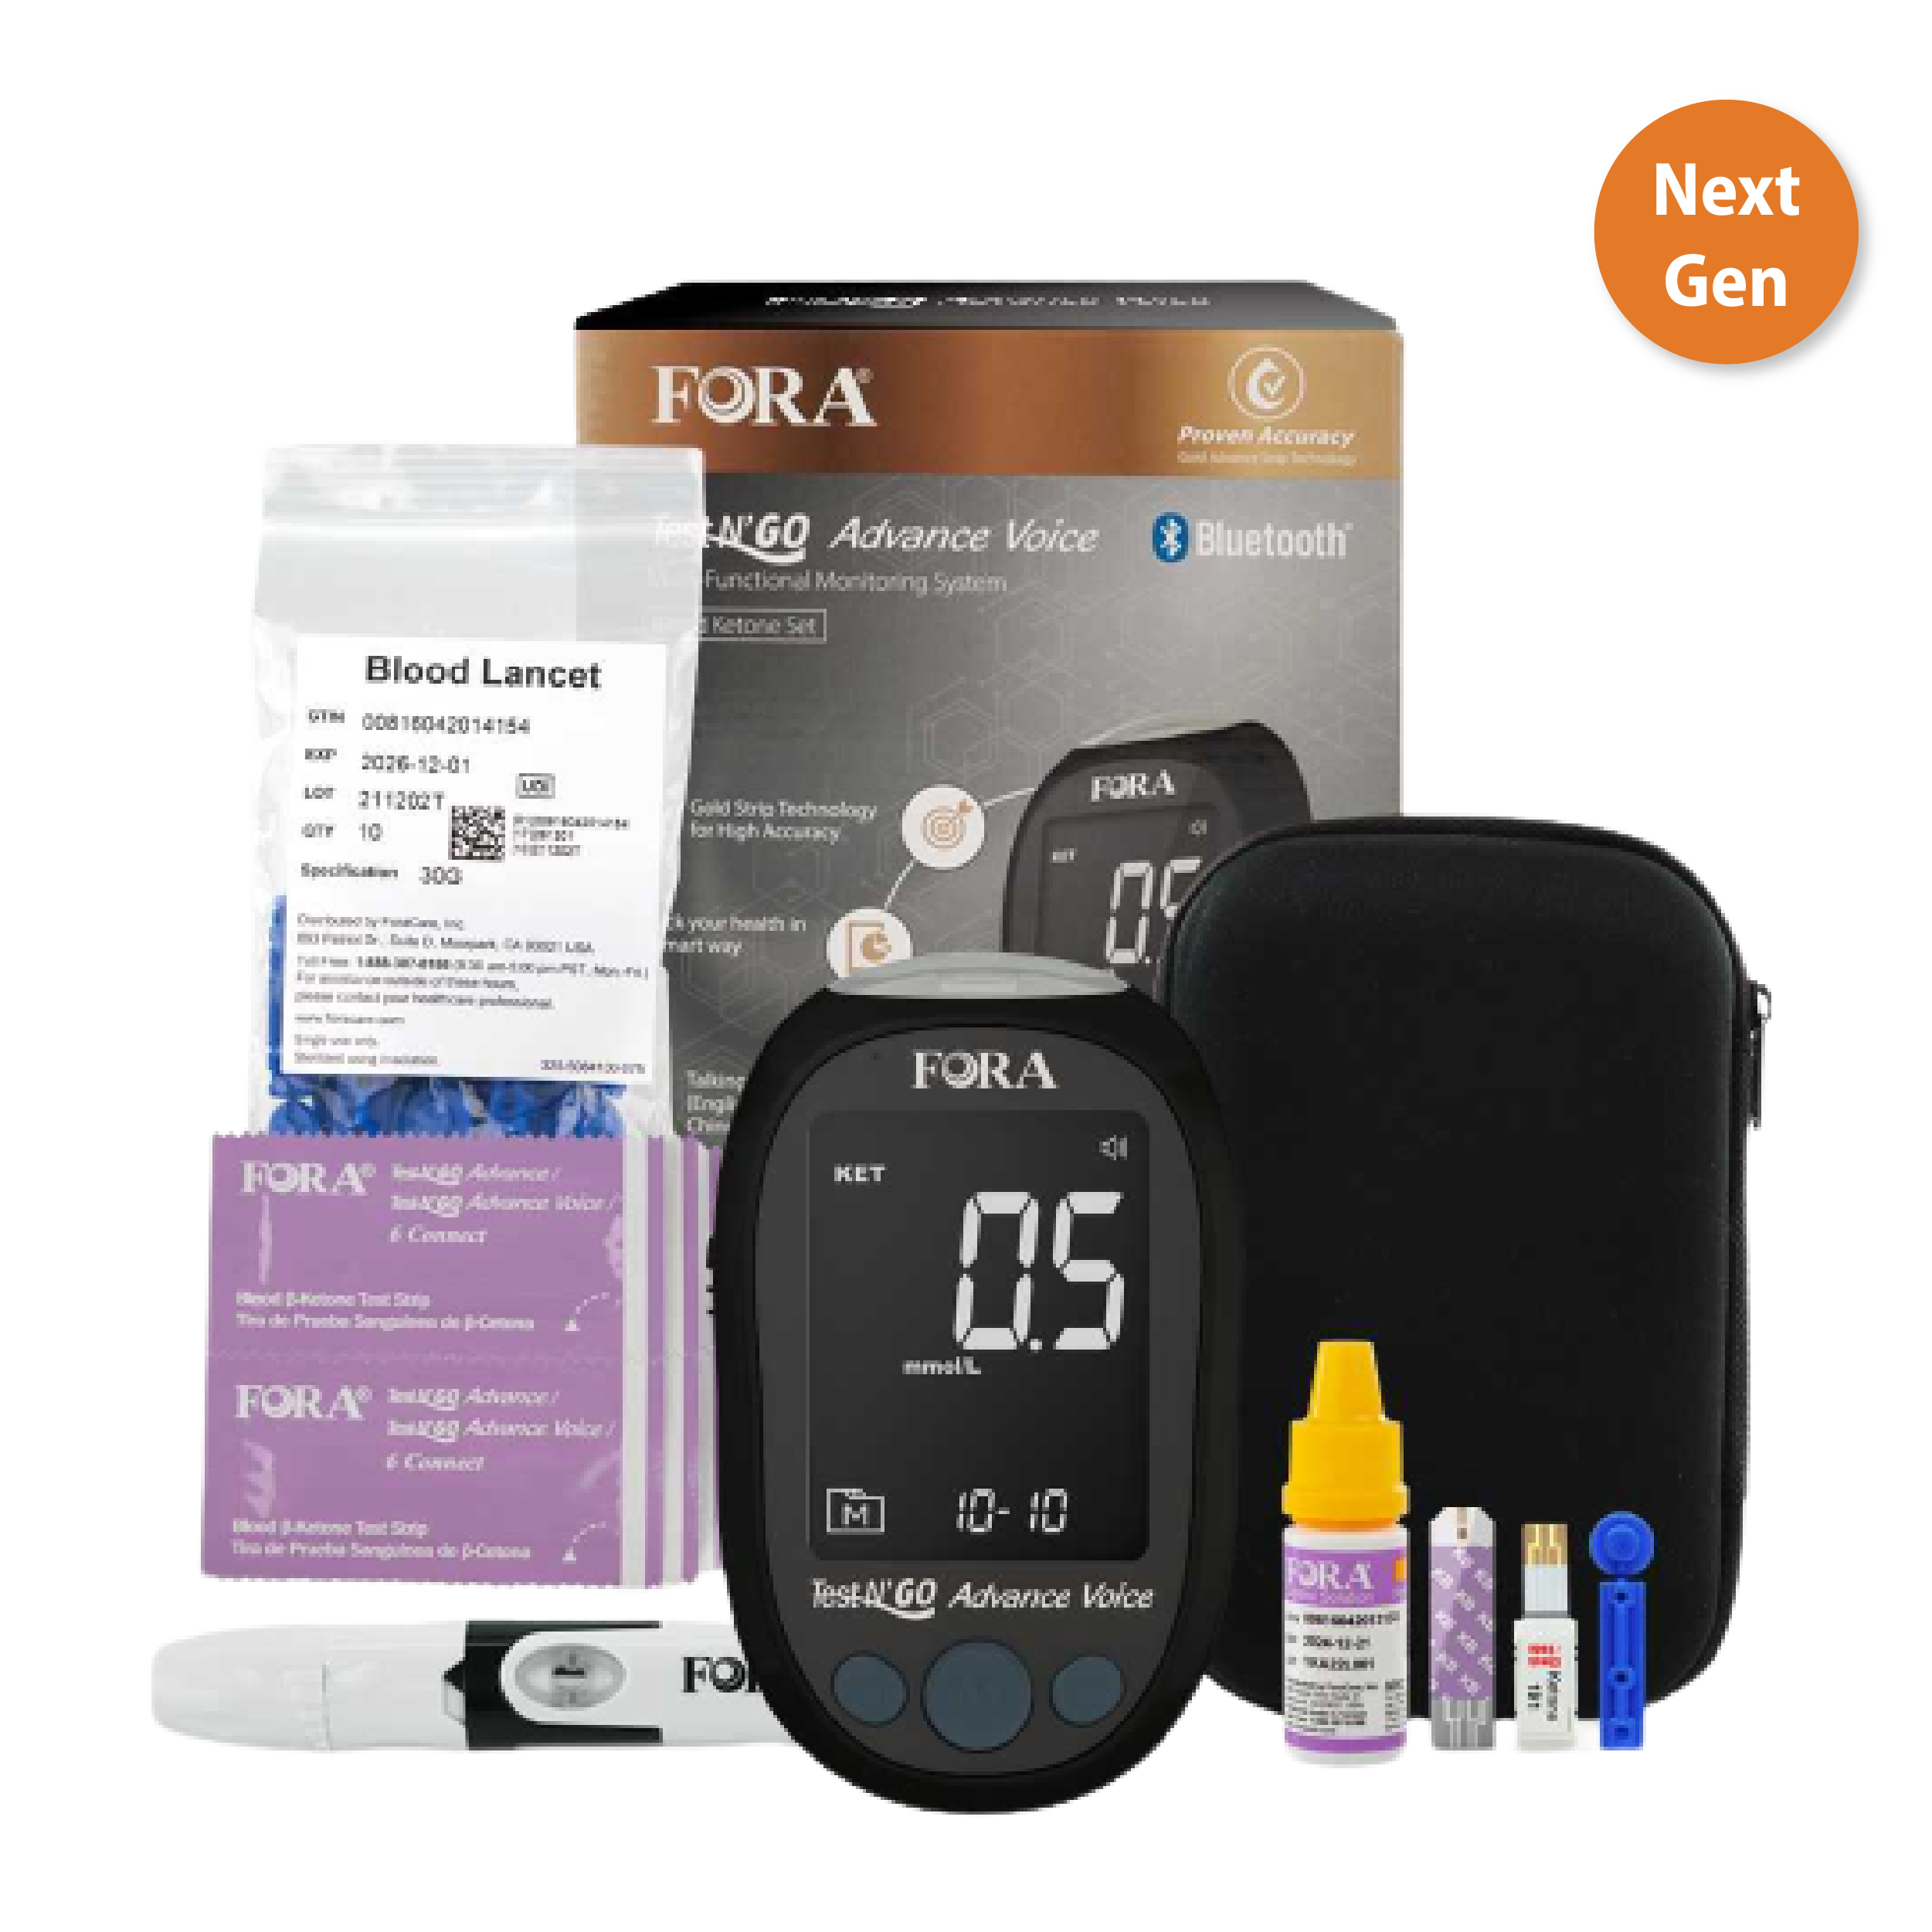 【Limited Time Promo】FORA Test N'GO Advance Voice Ketone Testing Kit (10 Strips, 10 Lancets) - Special Offer $29.99 (Was $45.99, List Price $70). Short-Dated: Expires 2024.06.05